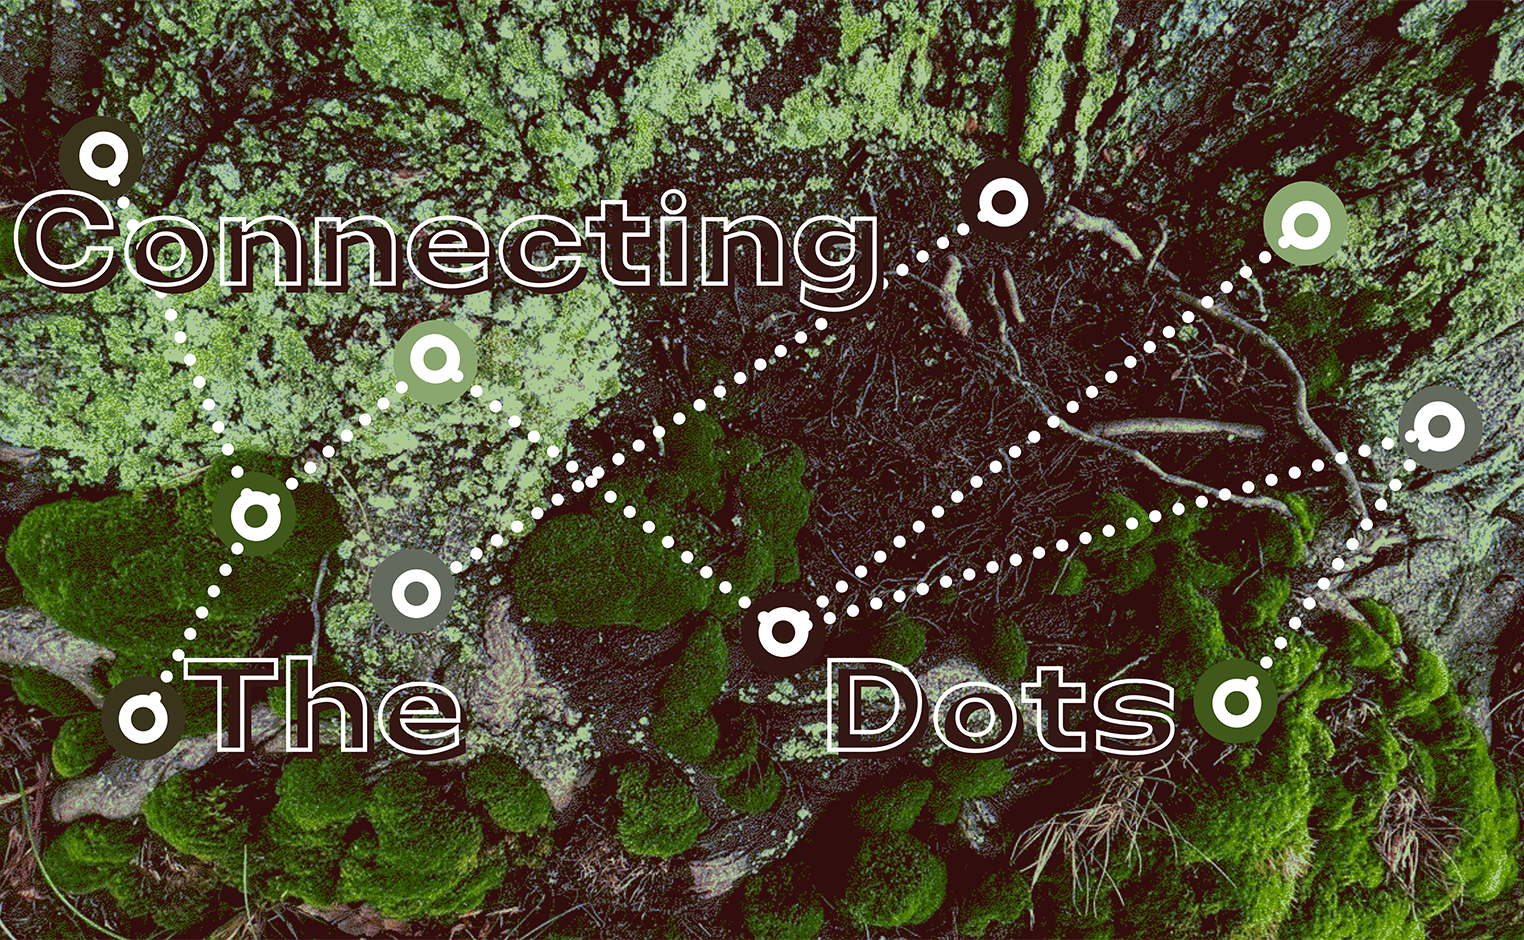 abstract image with text "connecting the dots"